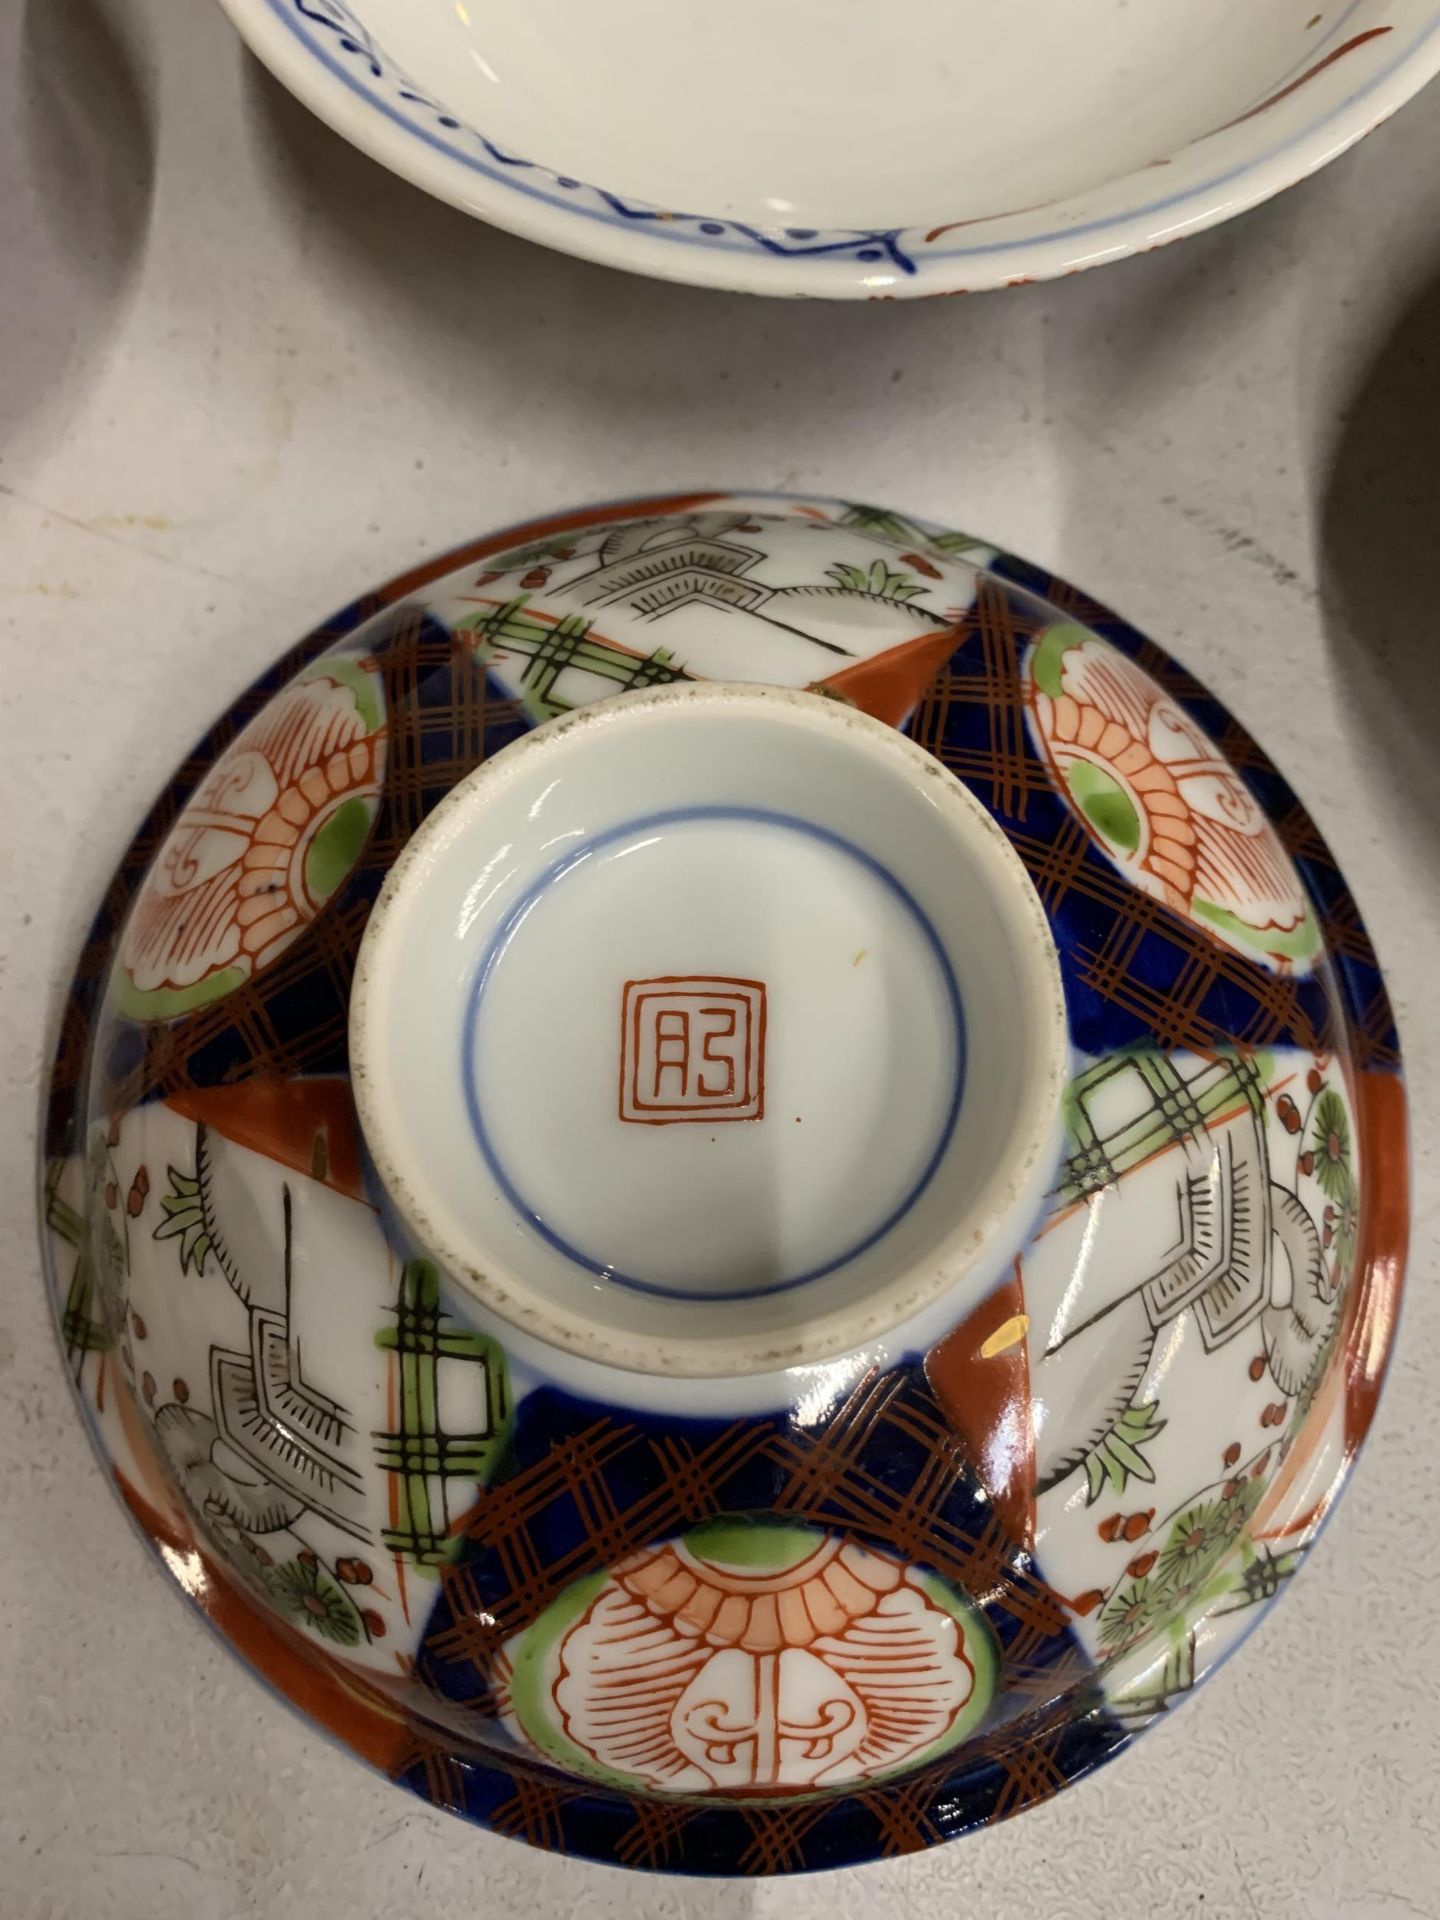 LARGE AMOUNT OF ORIENTAL STYLE BOWLS - Image 3 of 5